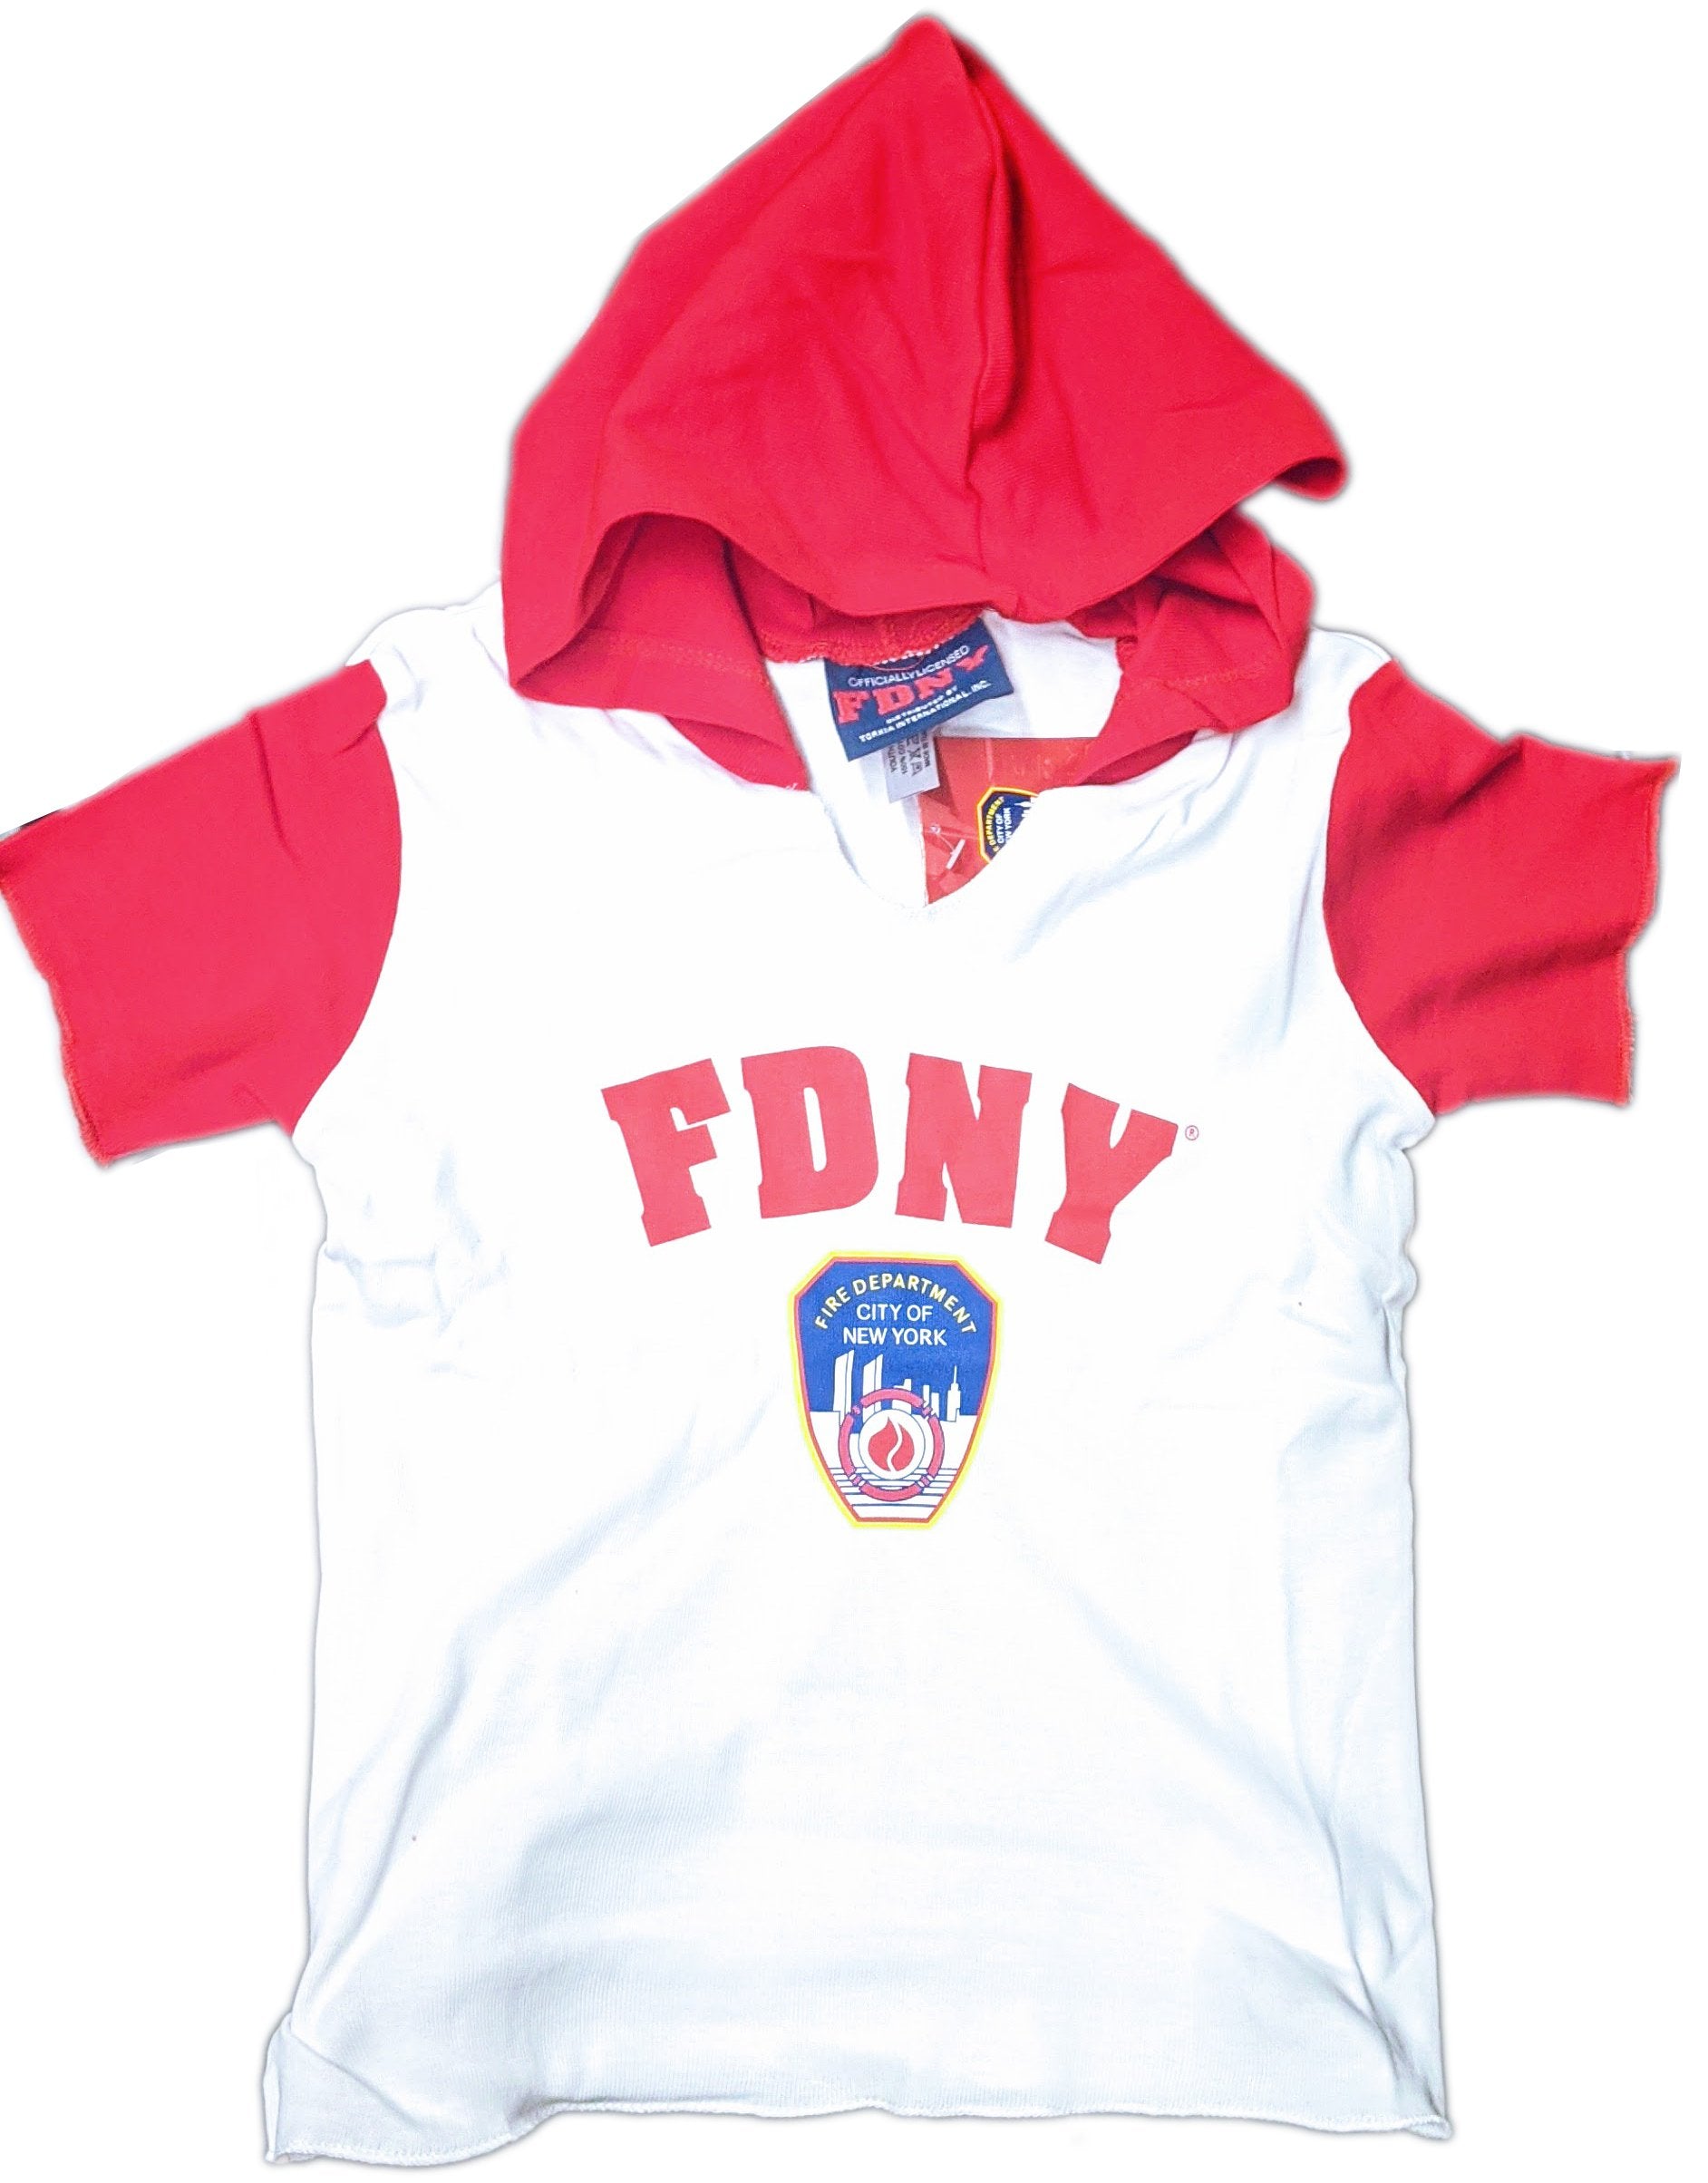 FDNY Kids Hoodie T-Shirt Youth NY Fire Dept Boys Girls Tee Red White